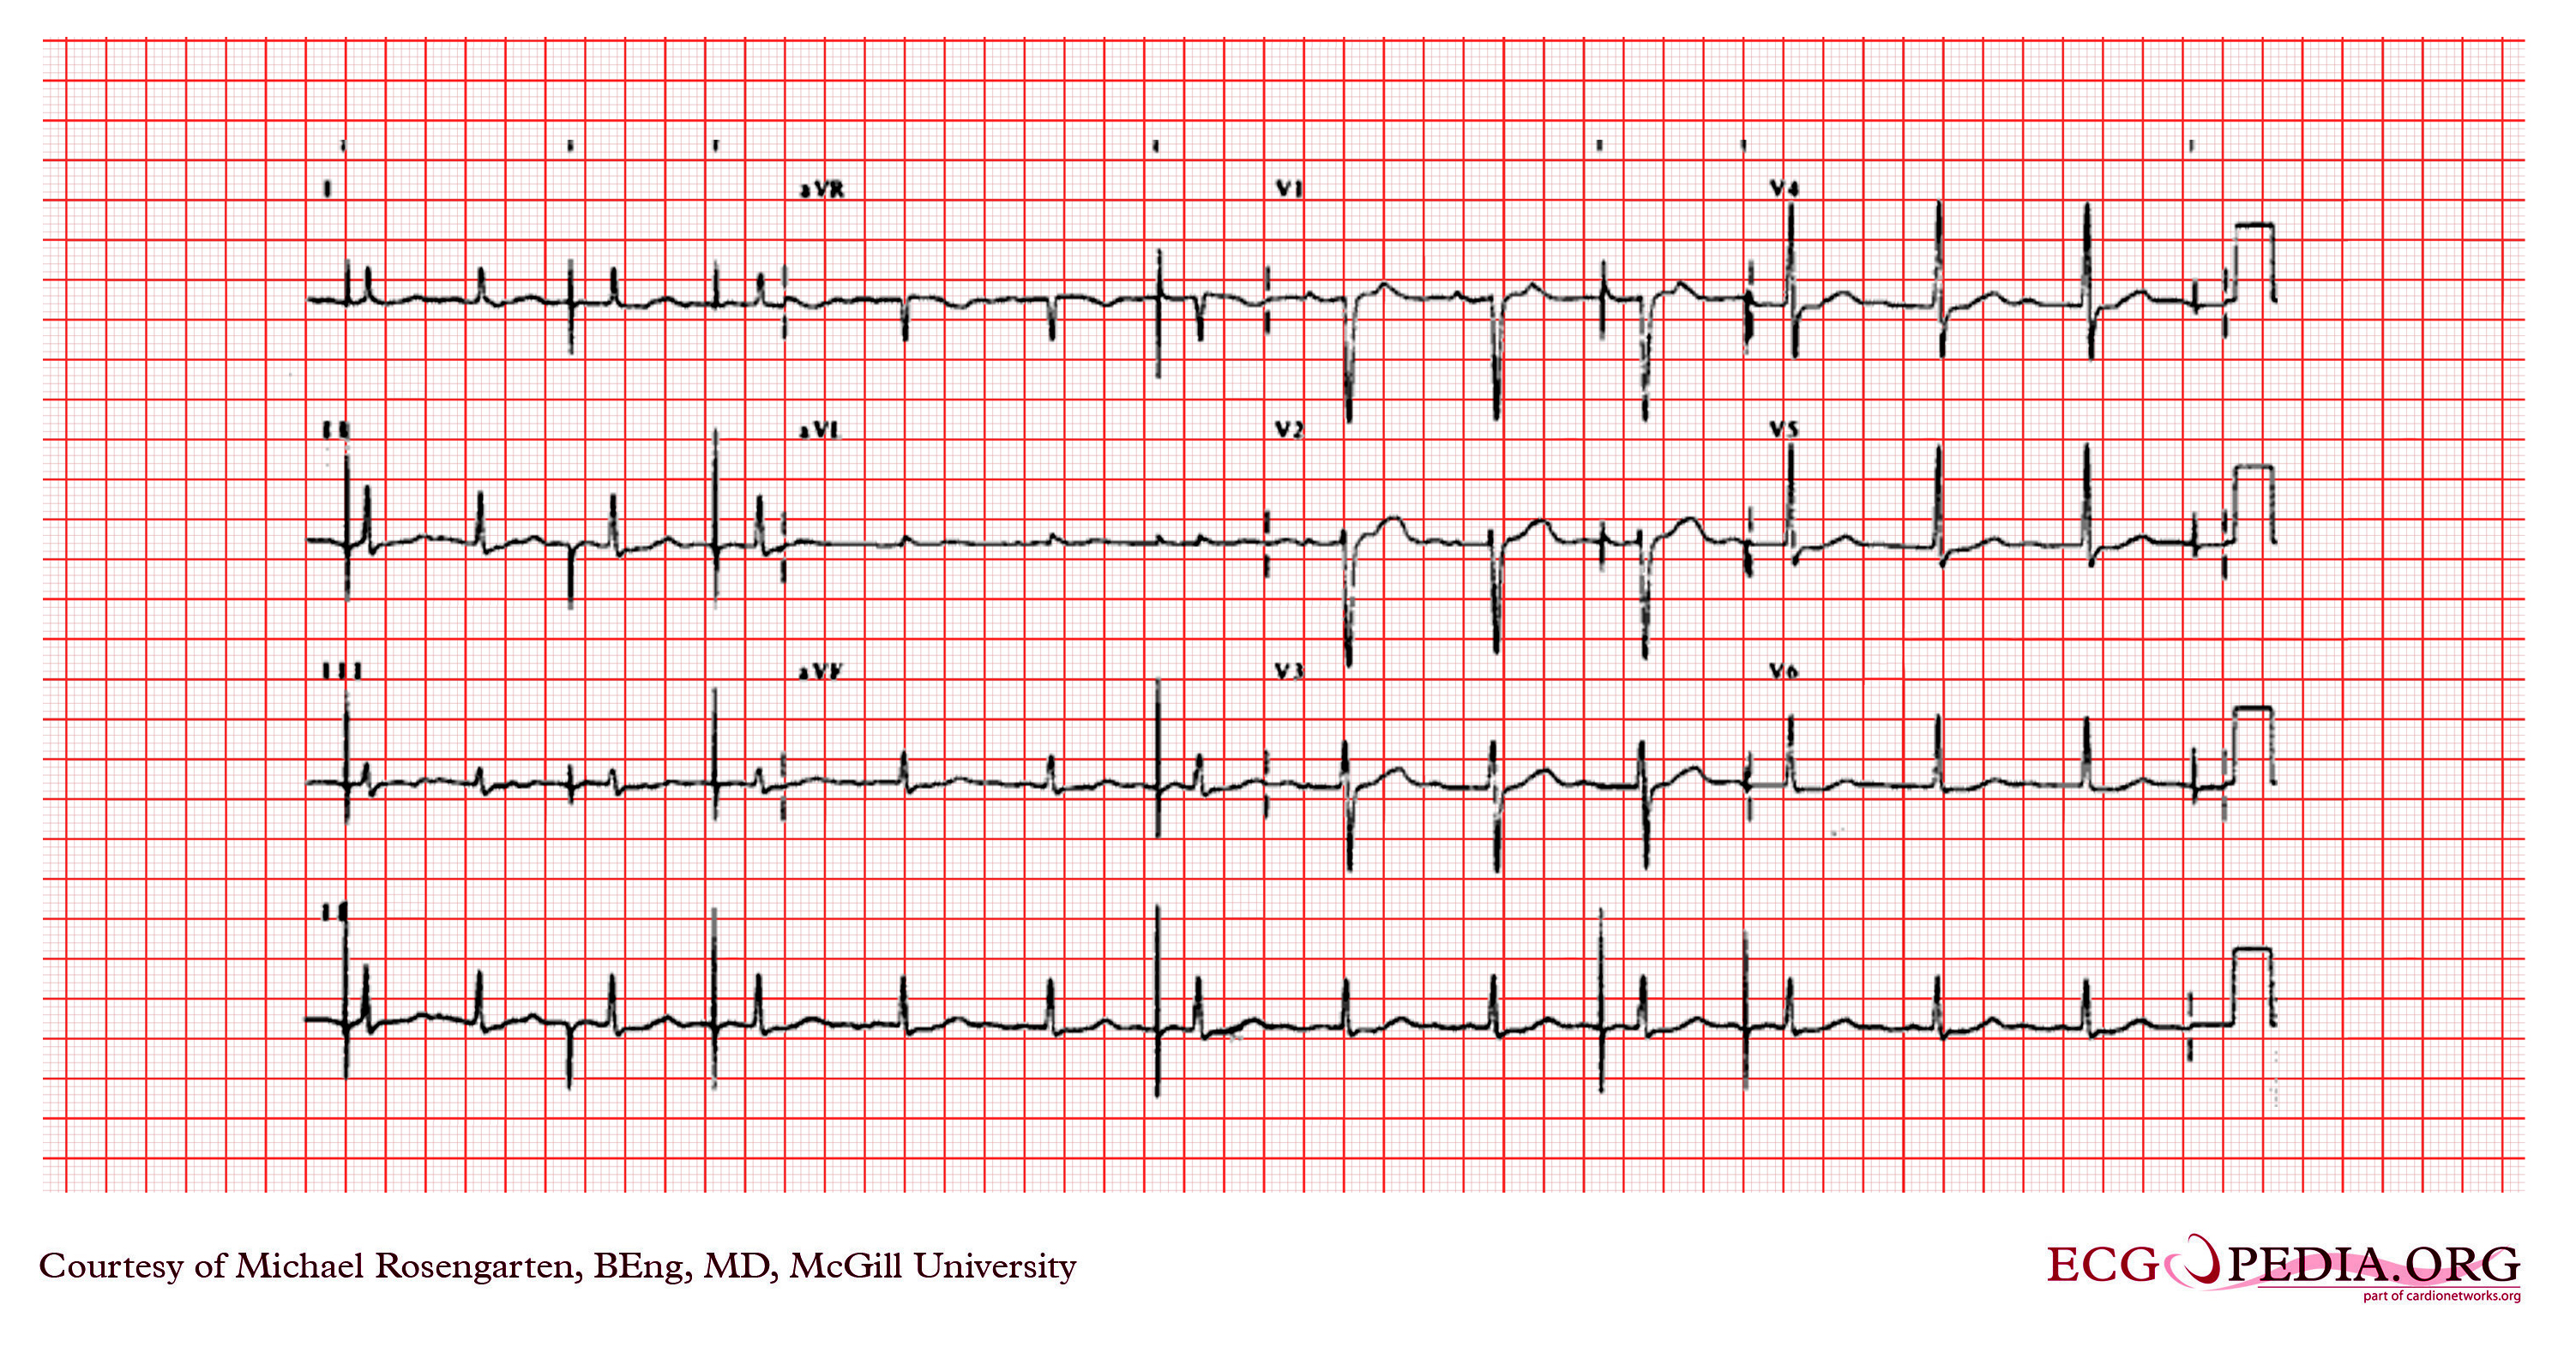 File:Paced atrial rhythm with a bipolar atrial pacemaker.jpg